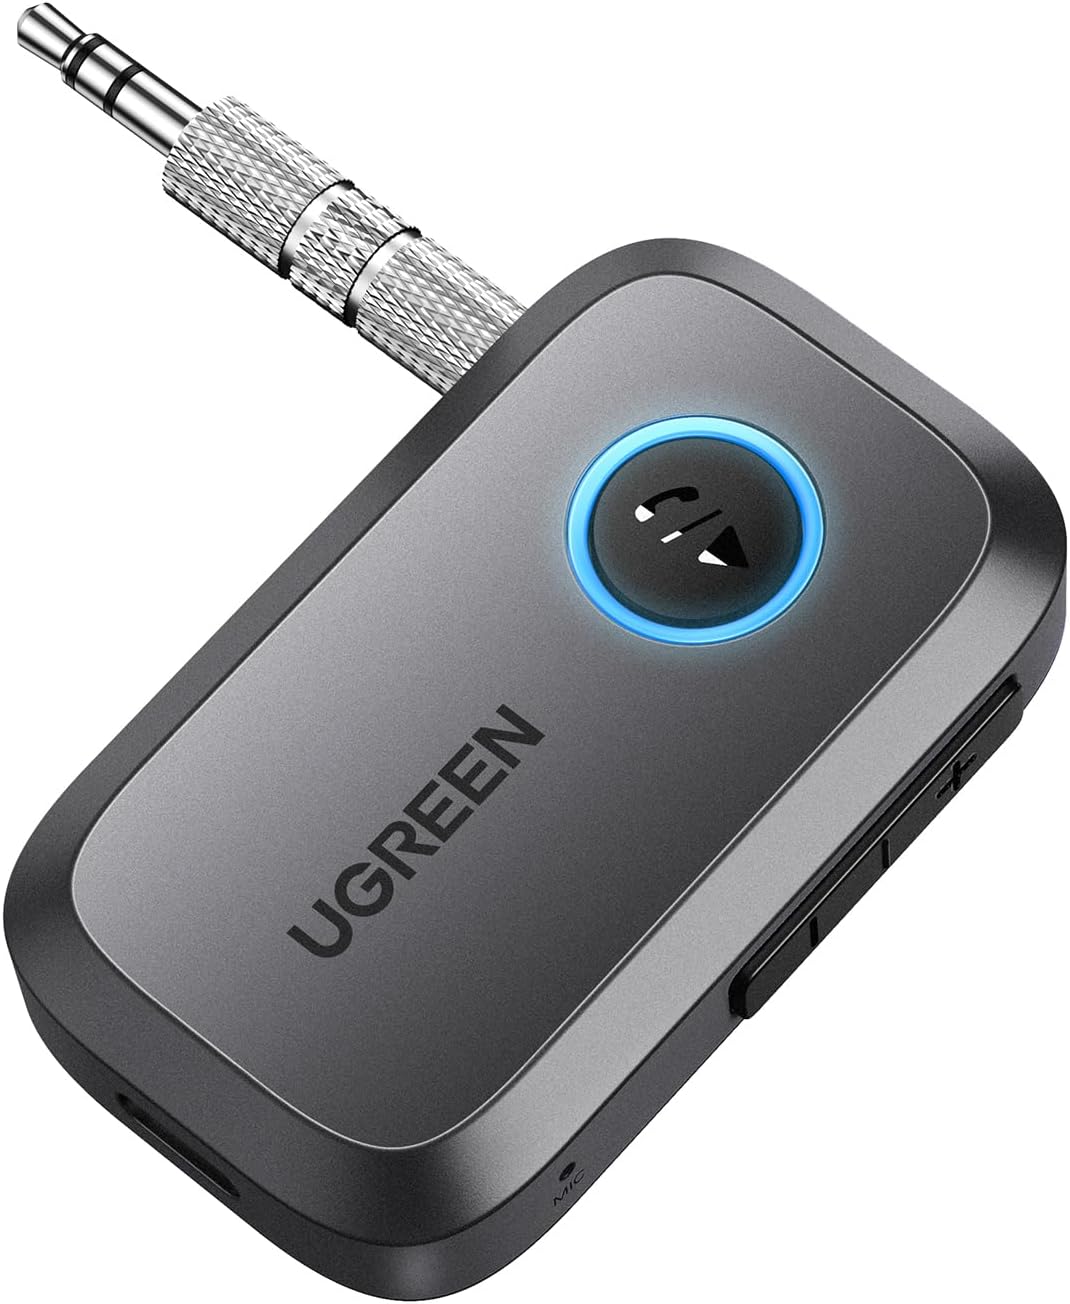 Prime Members: UGREEN 5.3 Aux Bluetooth Car Adapter $9.92, UGREEN USB 5.0 Bluetooth Adapter for PC $7 & More + Free Shipping